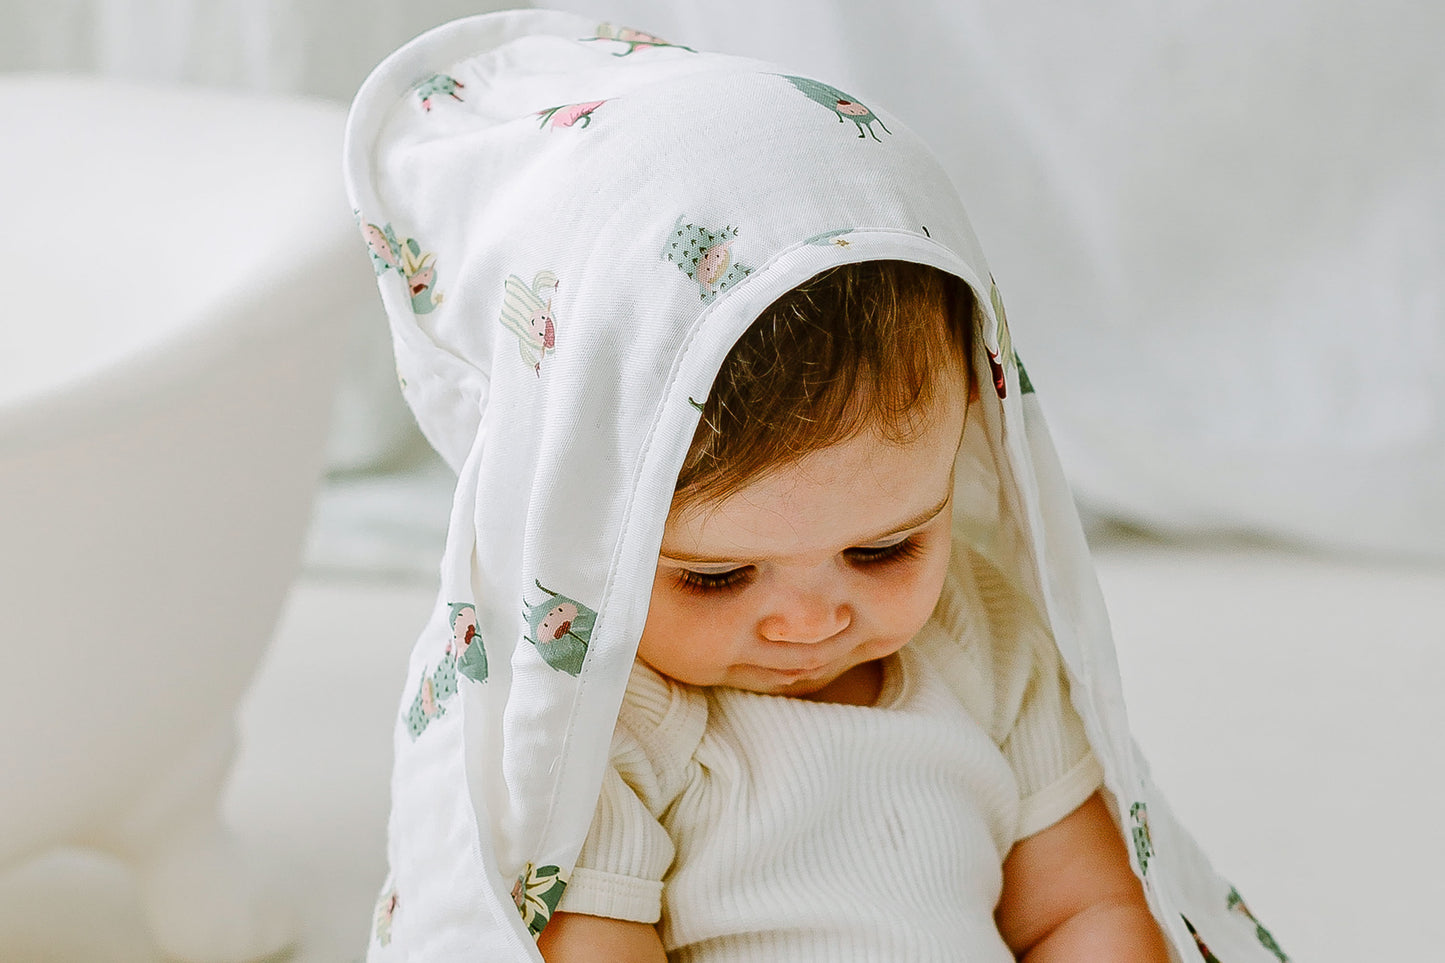 9-Layer Hooded Baby Bath Towel (Organic Cotton) - Pixie Dust